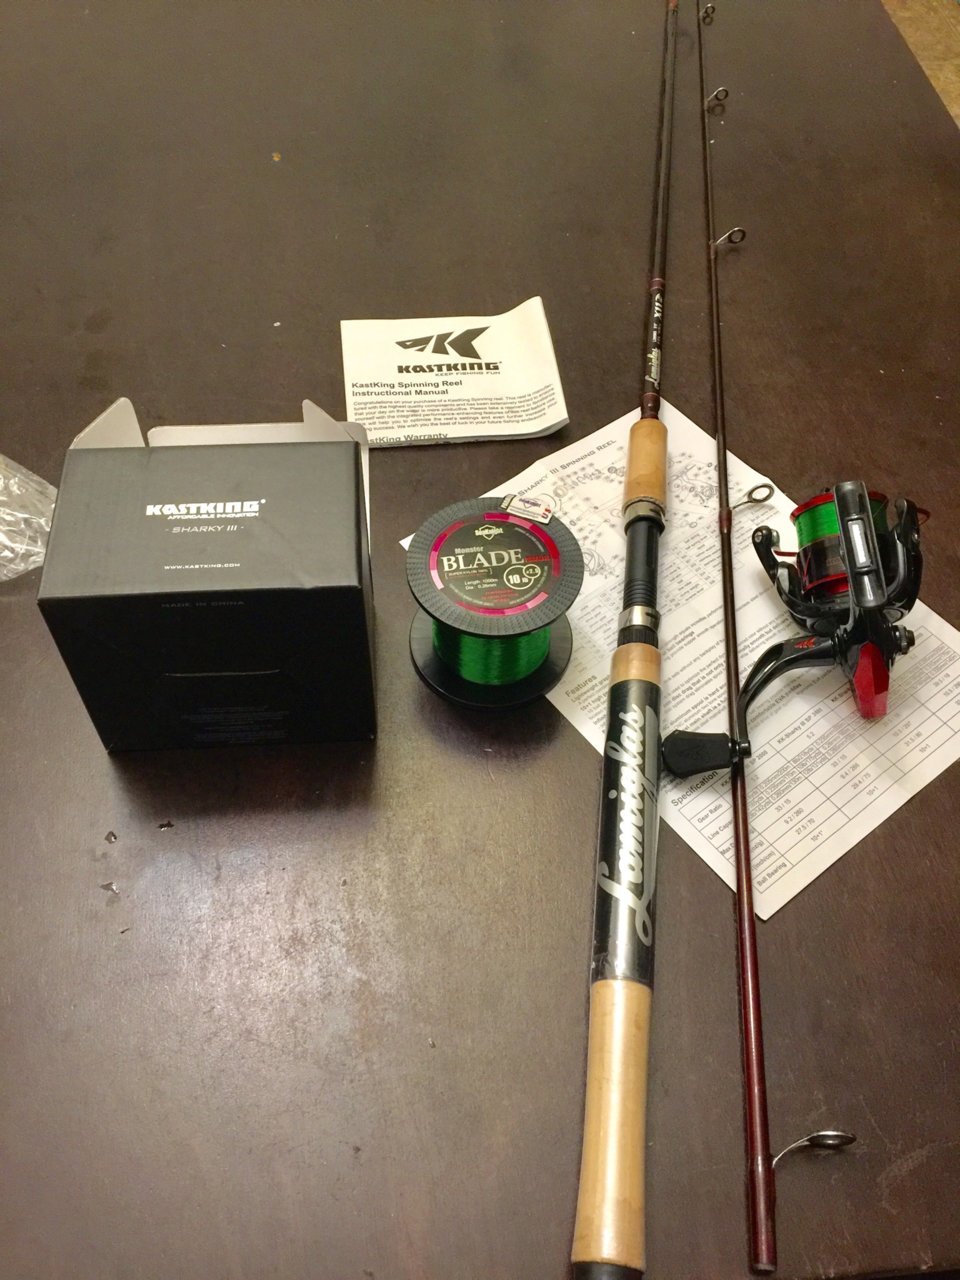 Show me your fishing gear set up!